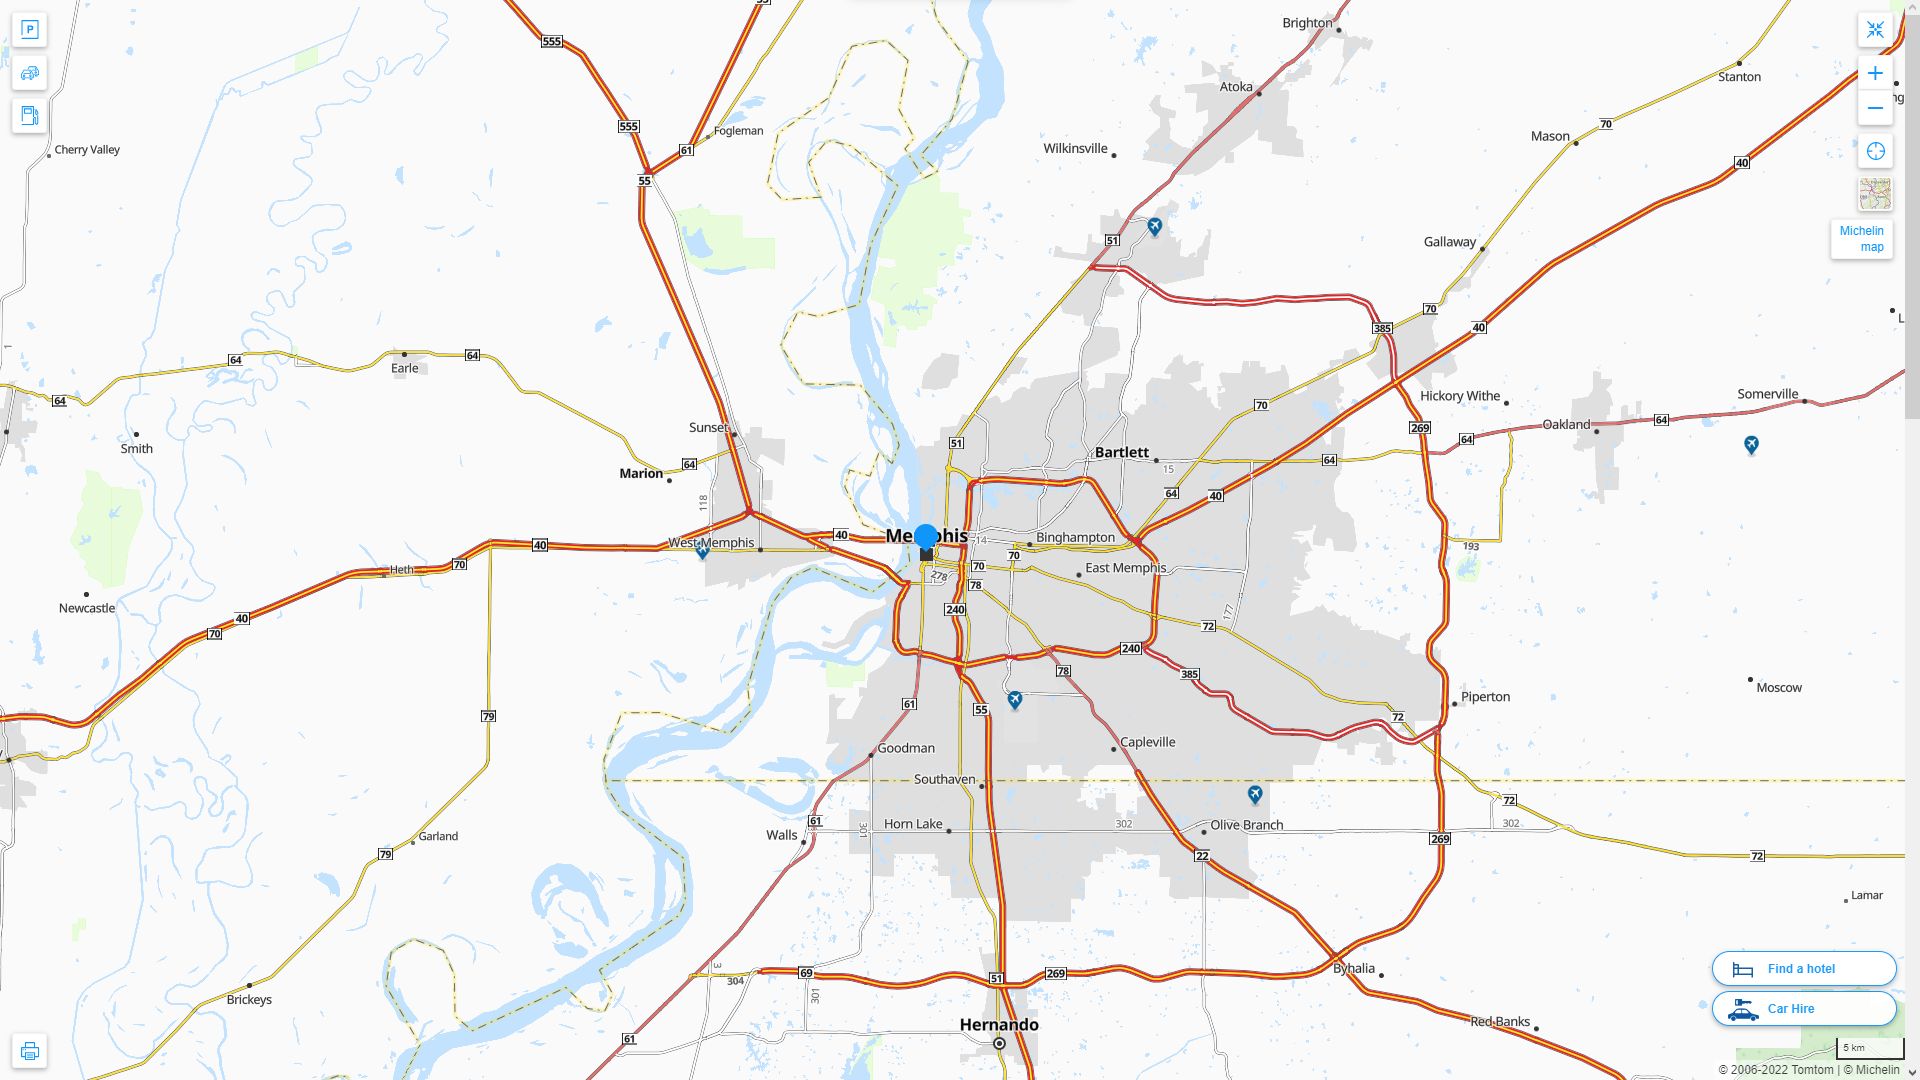 Memphis Tennessee Highway and Road Map